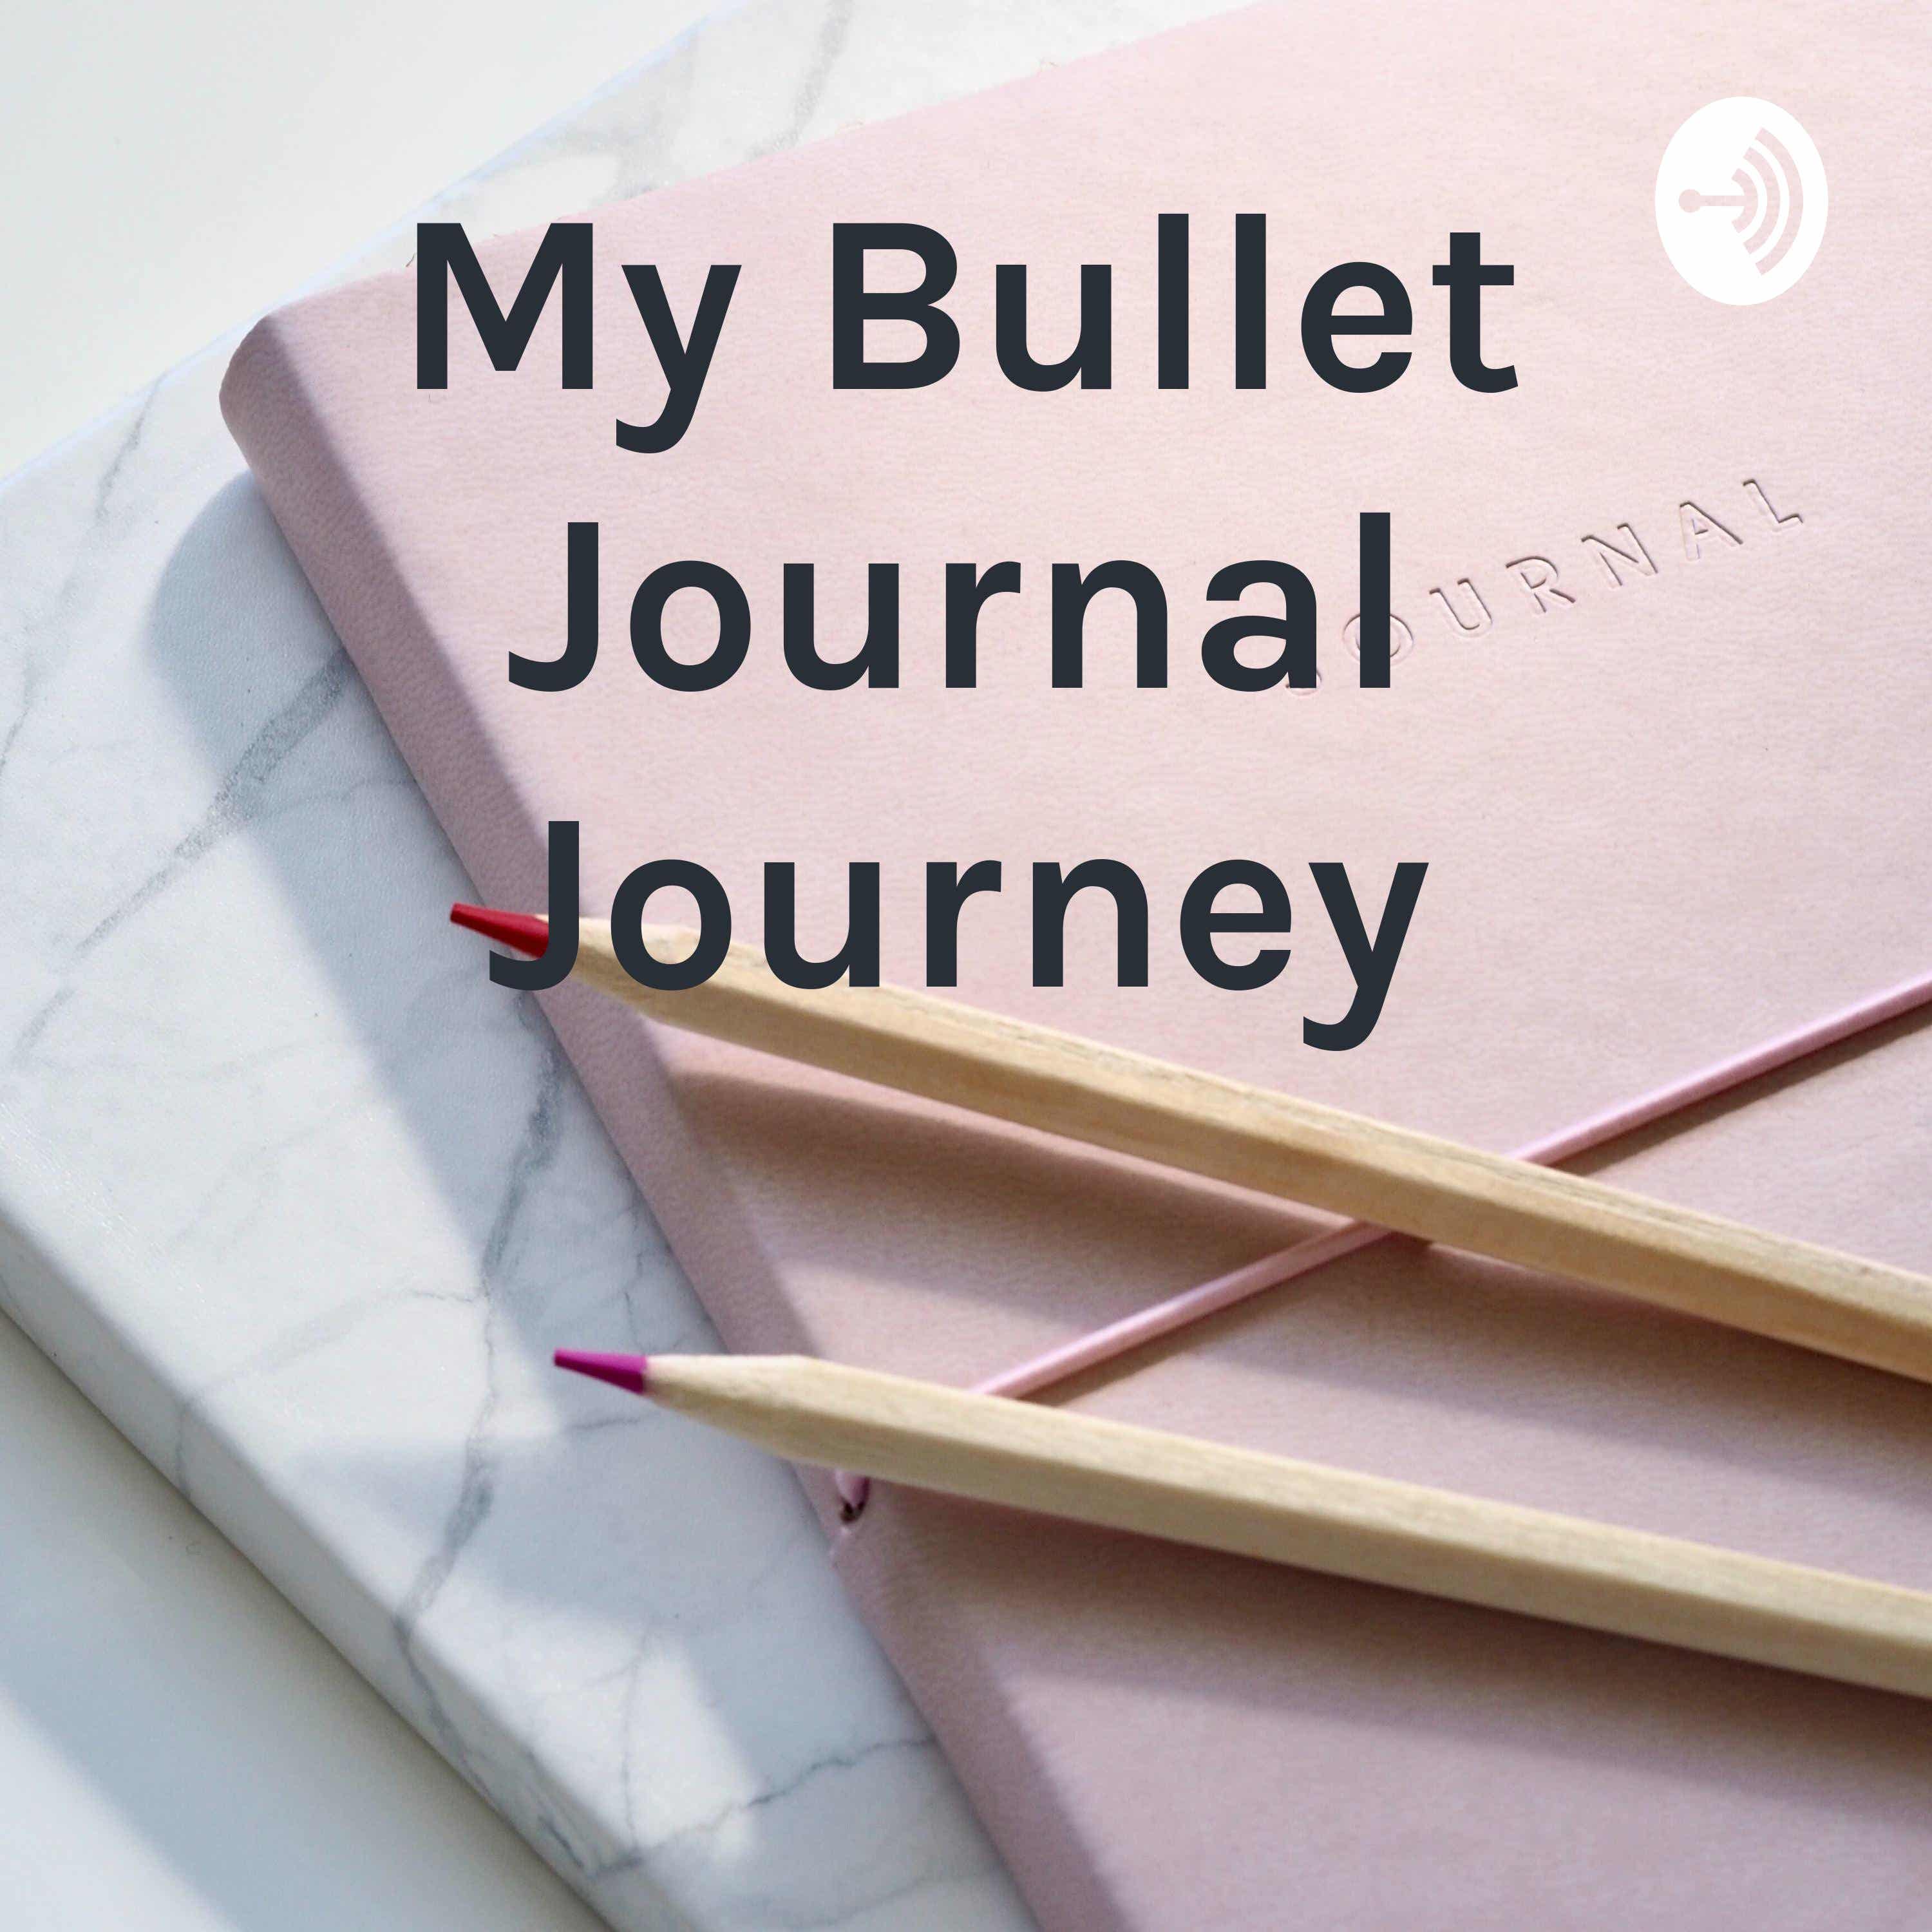 Review: The Bullet Journal by Ryder Carroll